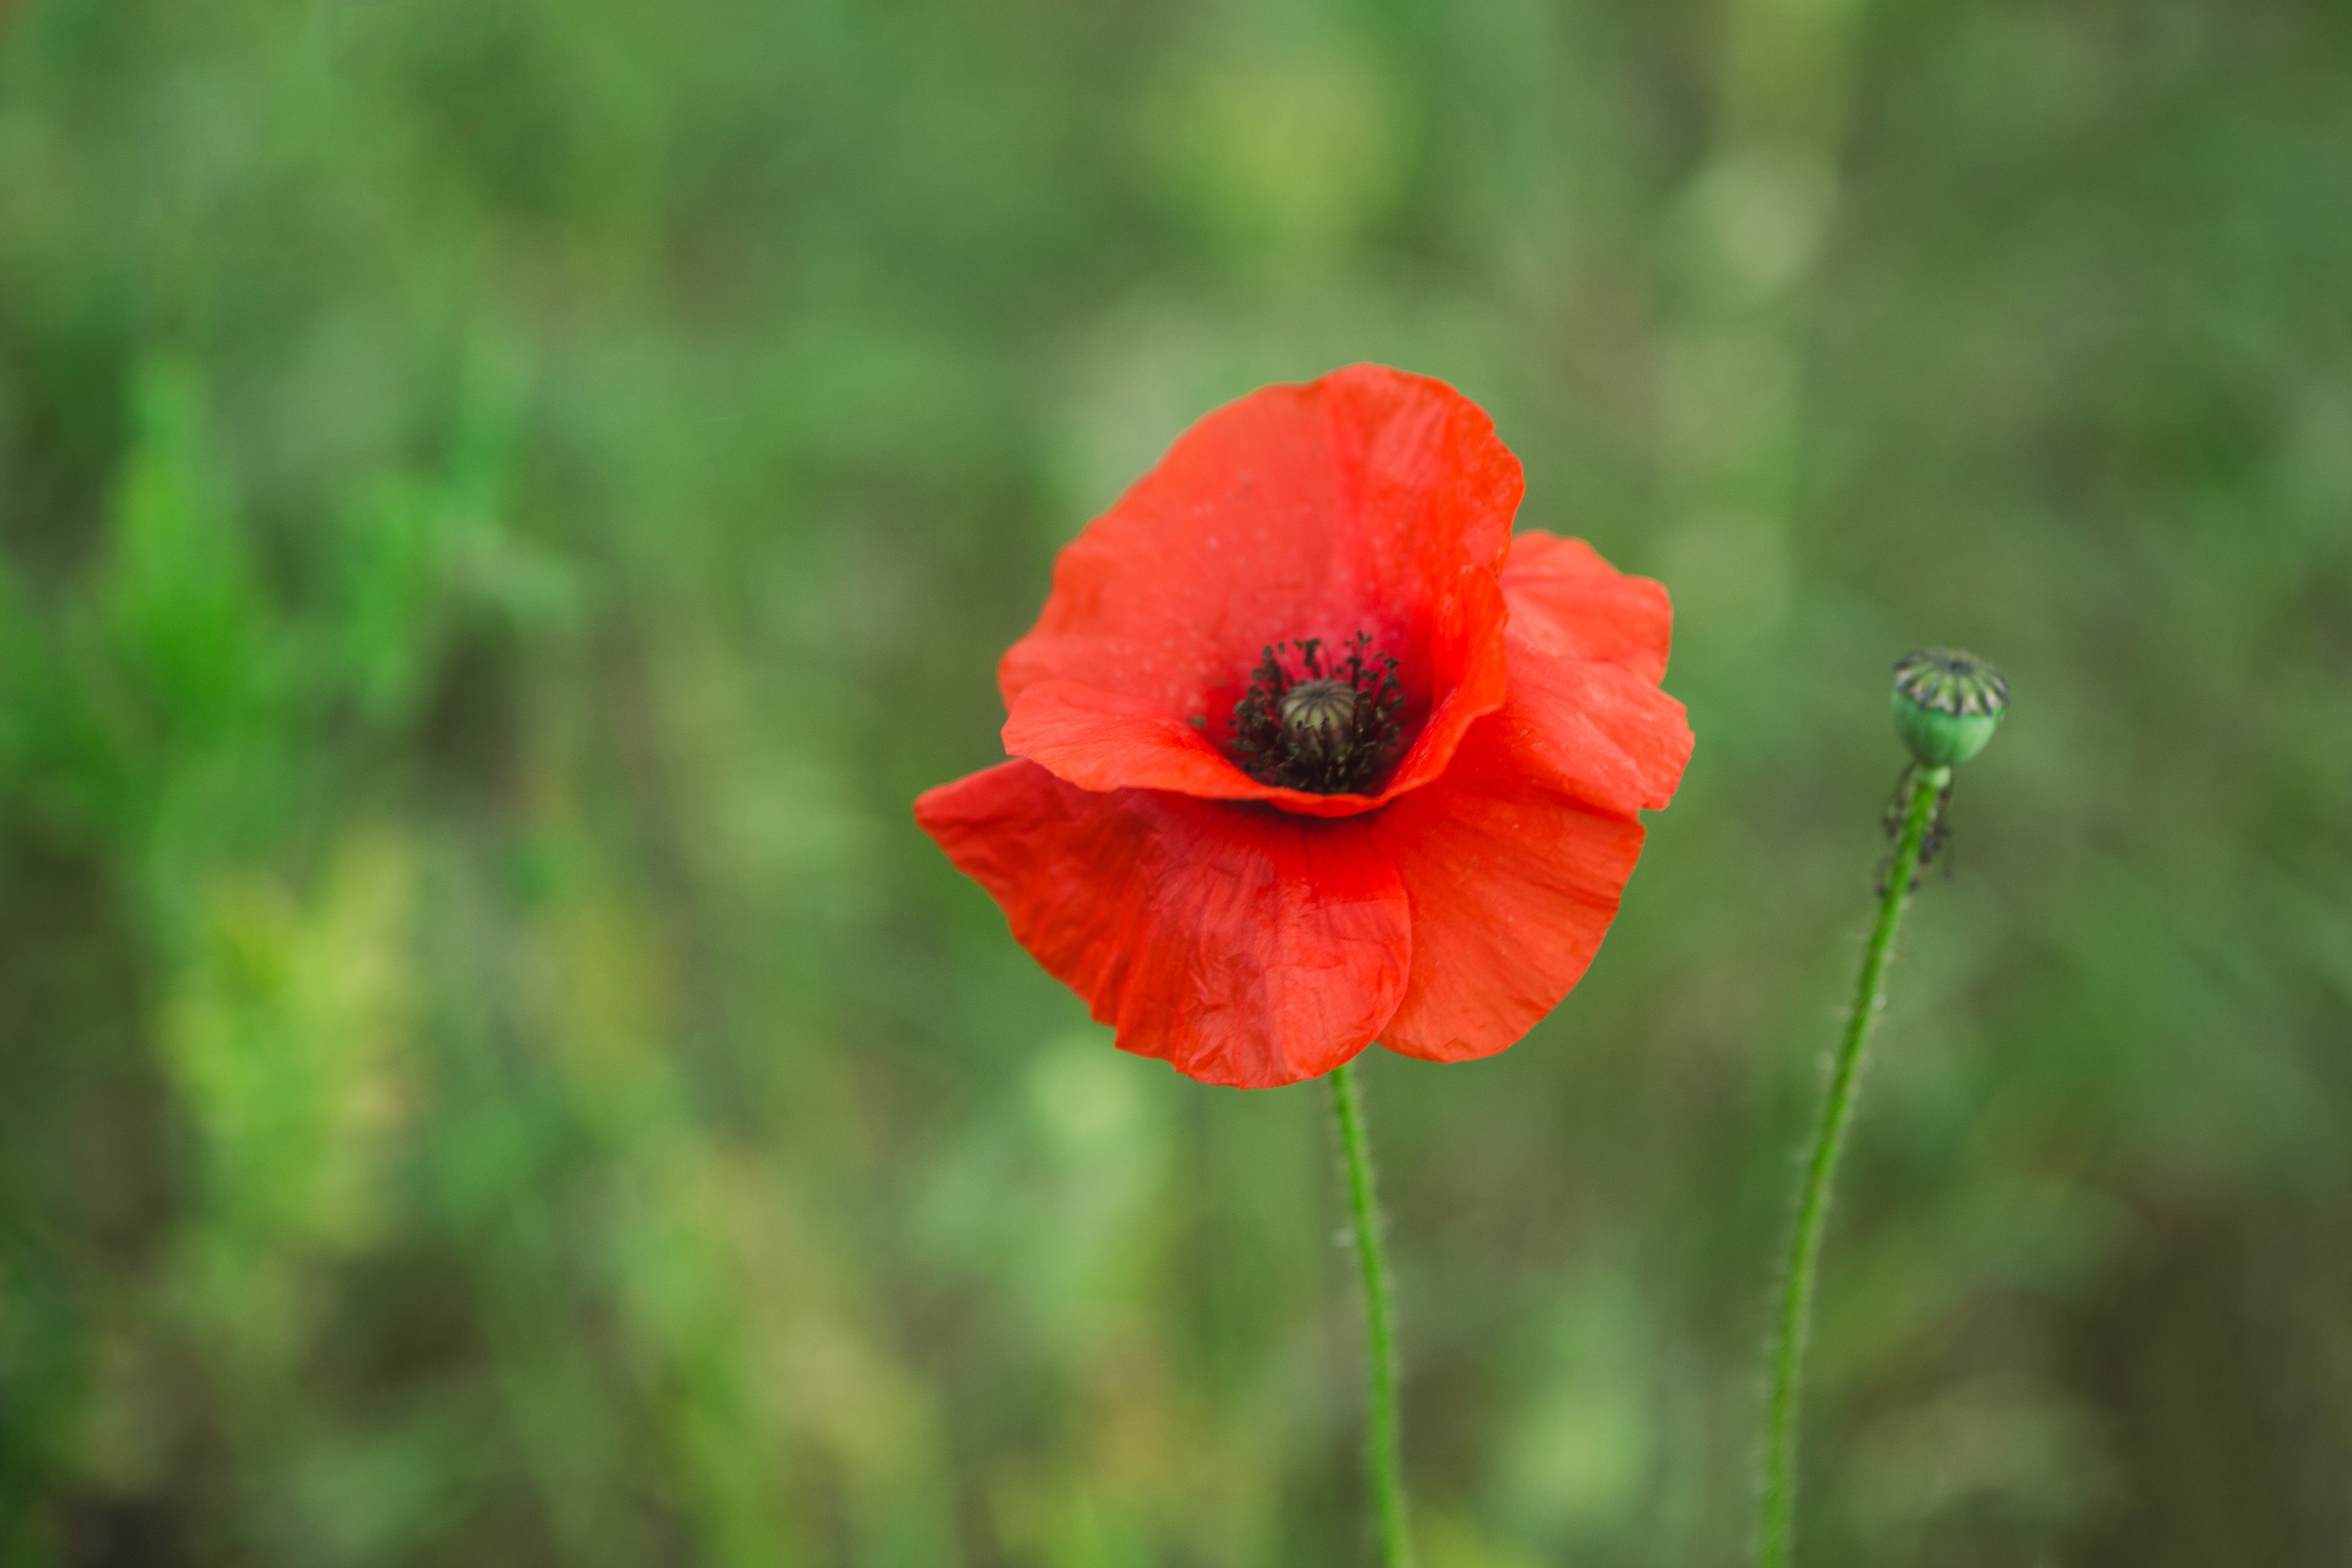 November, Remembrance, and Poppies